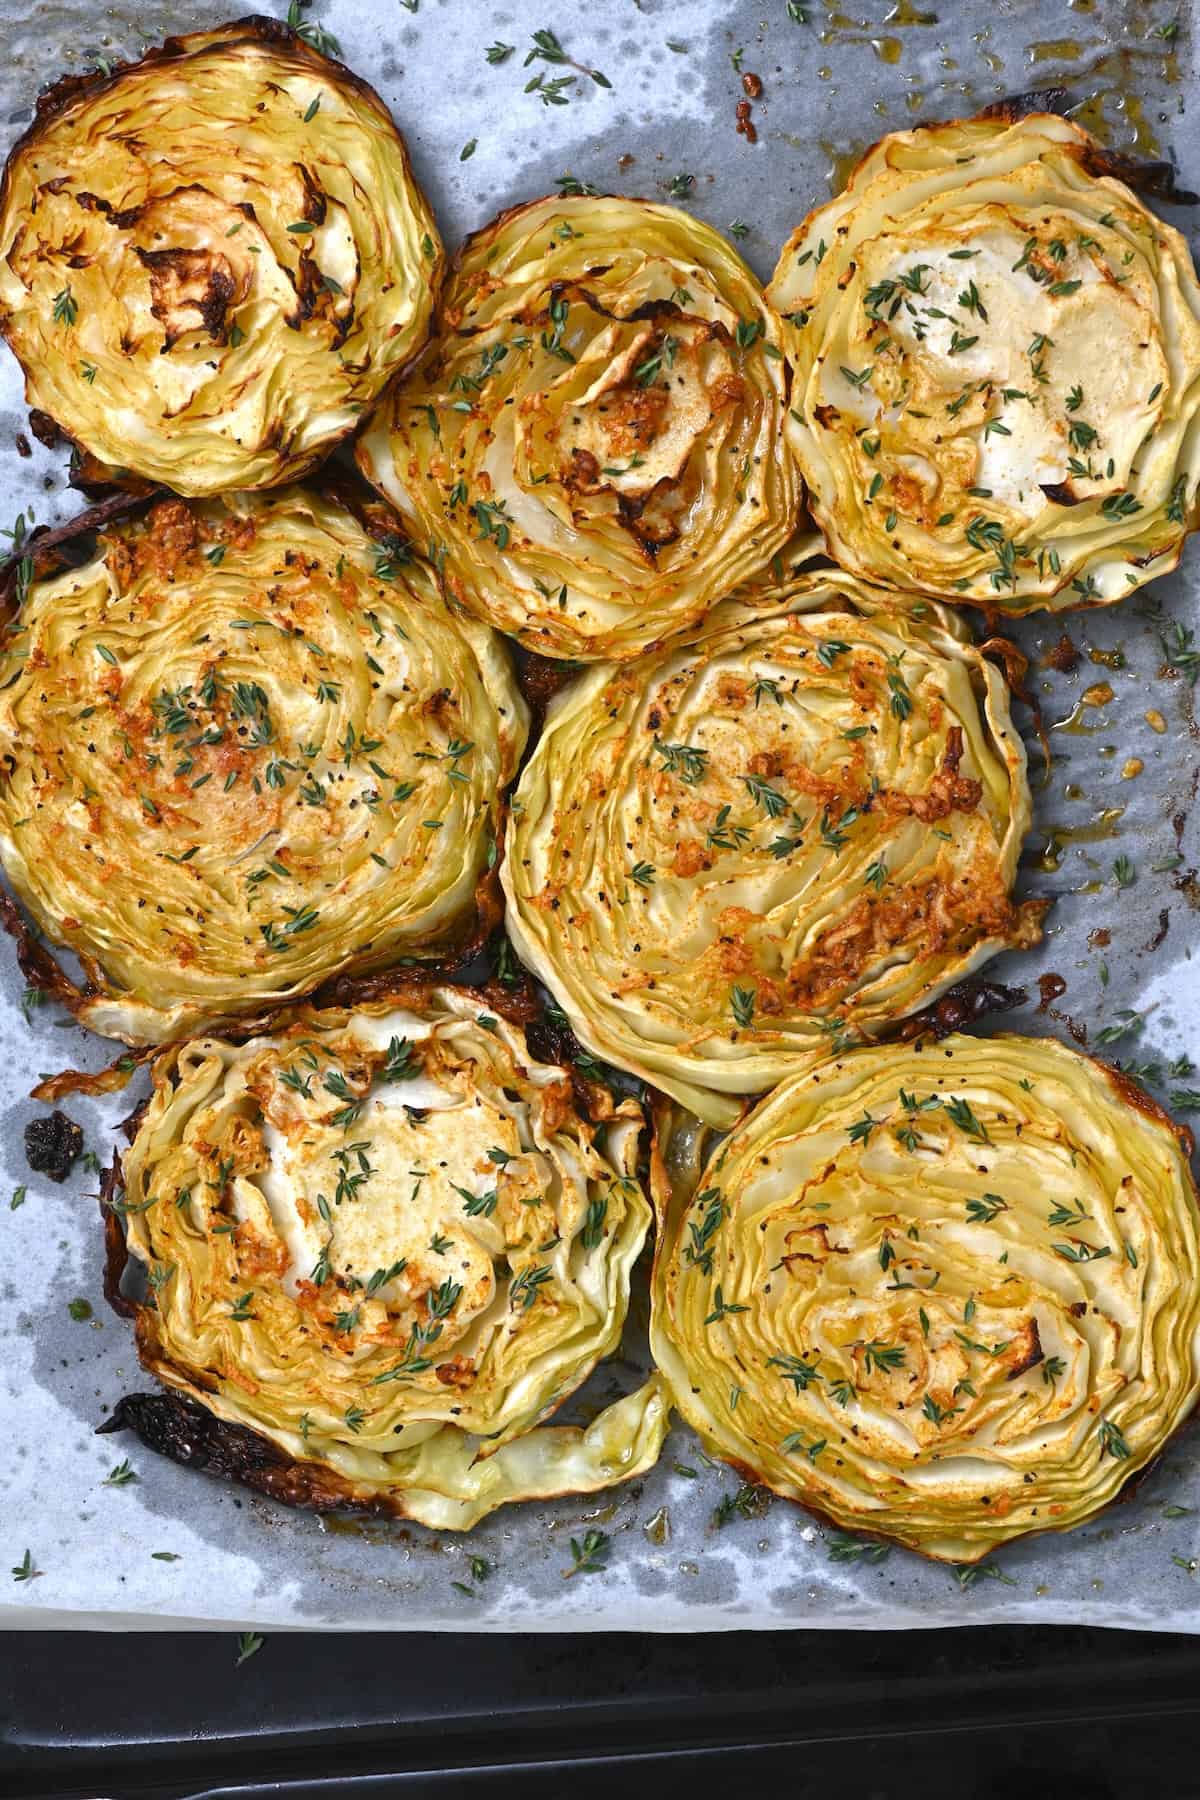 Seven cabbage steaks topped with thyme on a tray